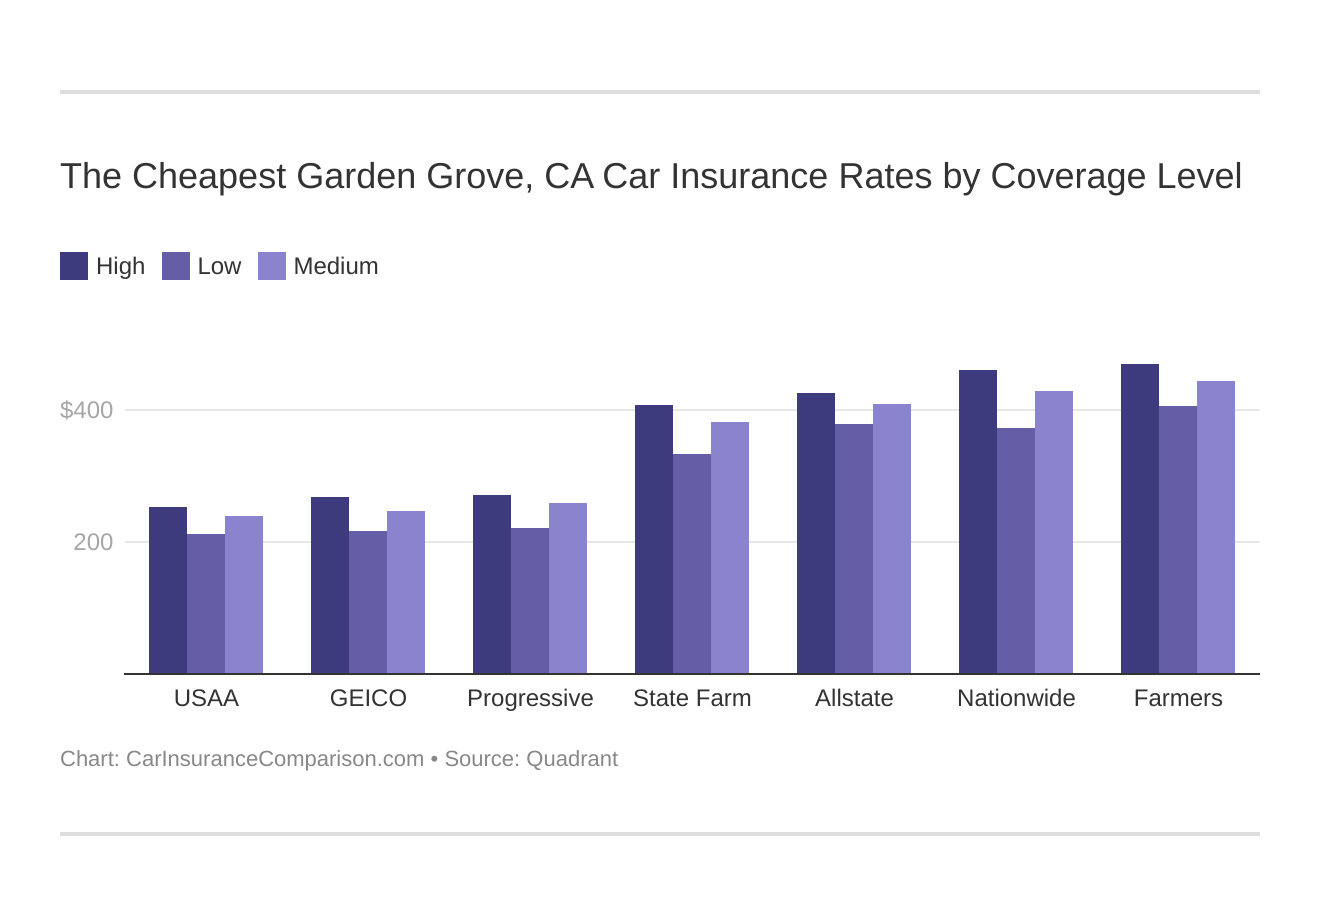 The Cheapest Garden Grove, CA Car Insurance Rates by Coverage Level